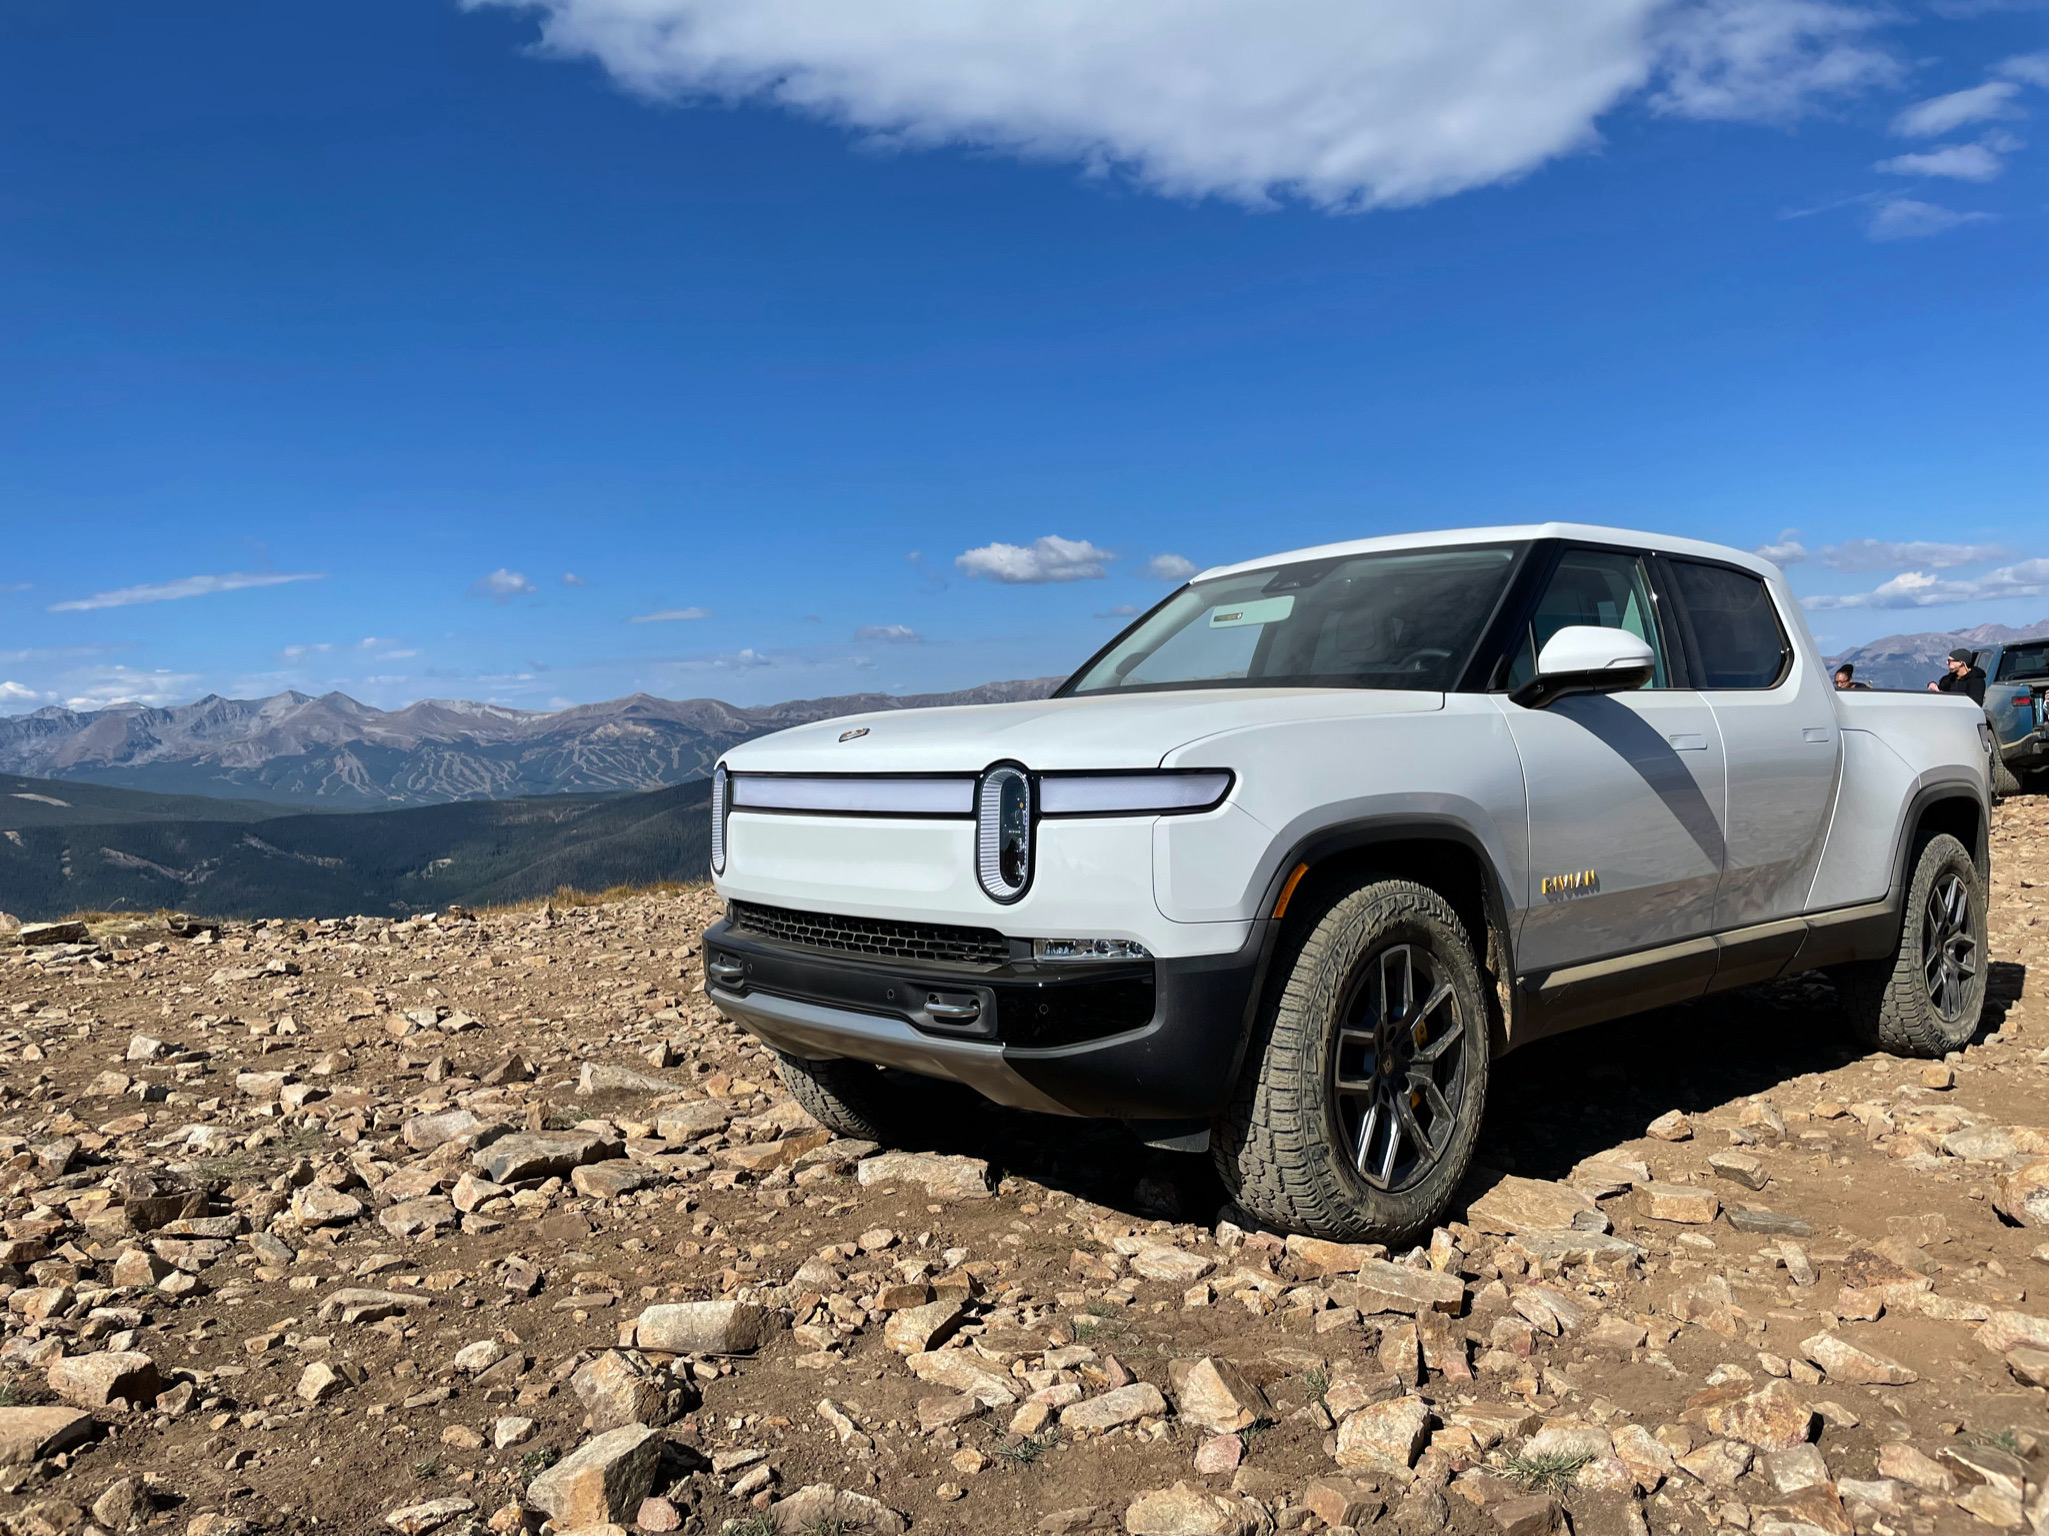 Rivian Showing Progress on Production and Expansion Goals for 25,000 EVs in 2022